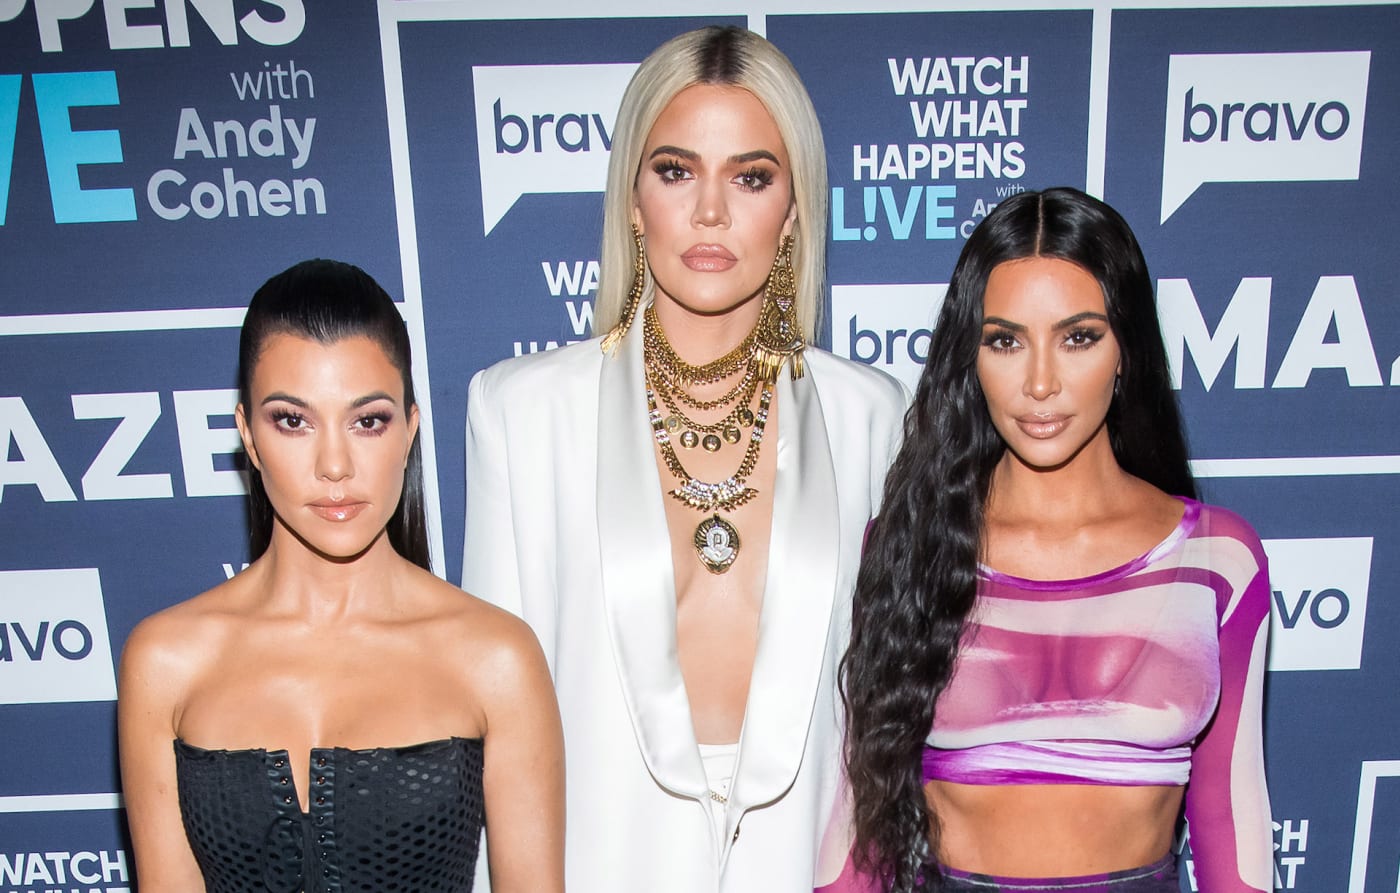 Kourtney, Khloe, and Kim Kardashian pay tribute to late father on what would've been his 78th birthday